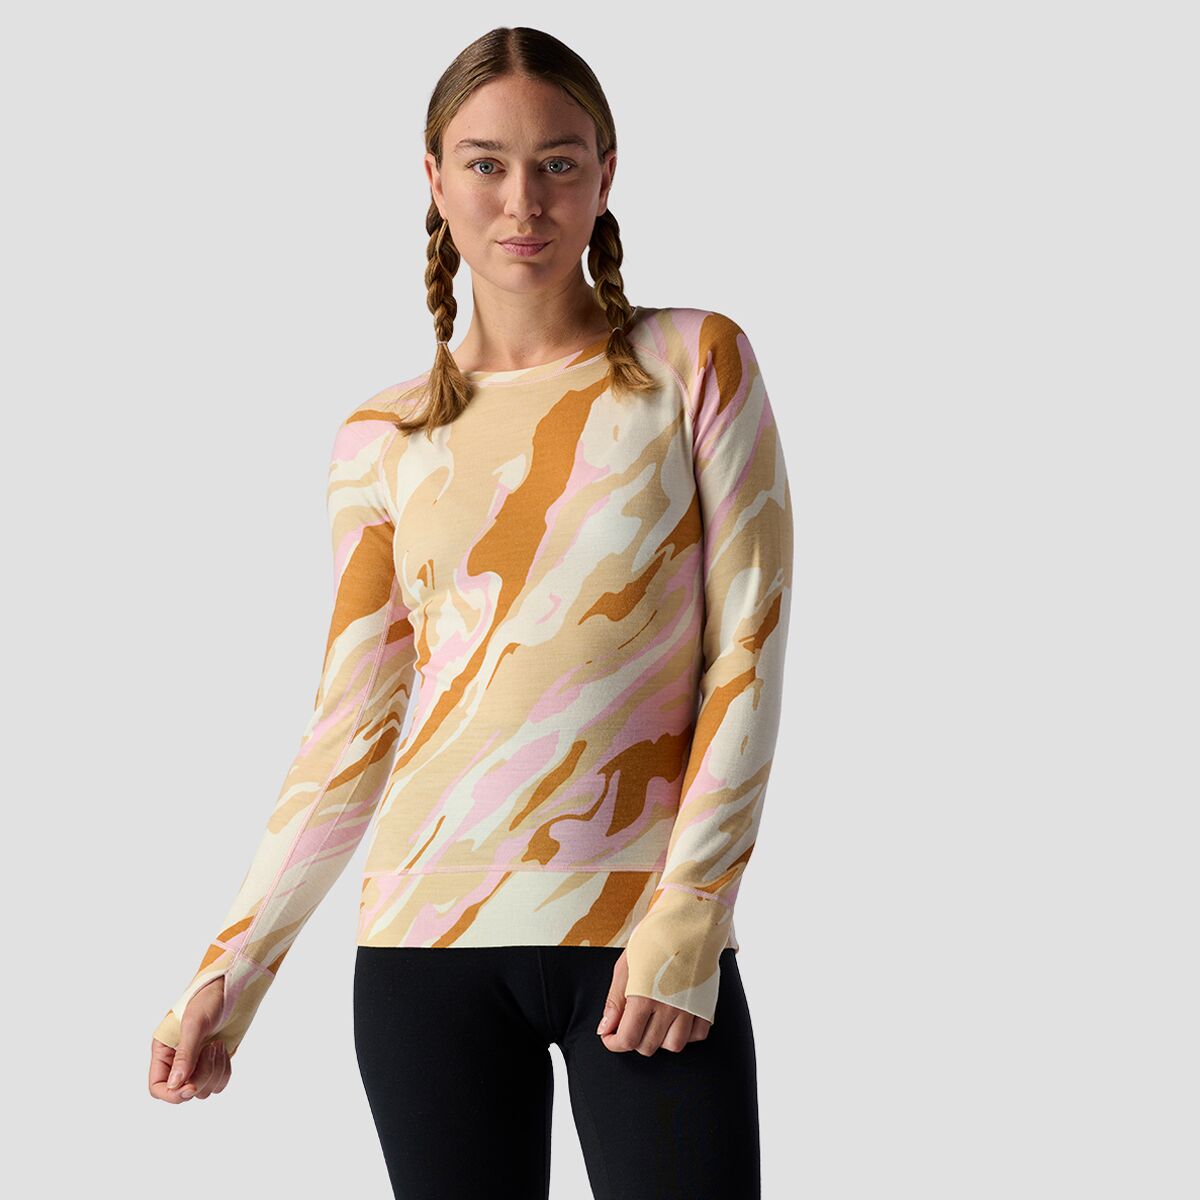 Backcountry Spruces Mid-Weight Merino Printed Baselayer Crew - Women's